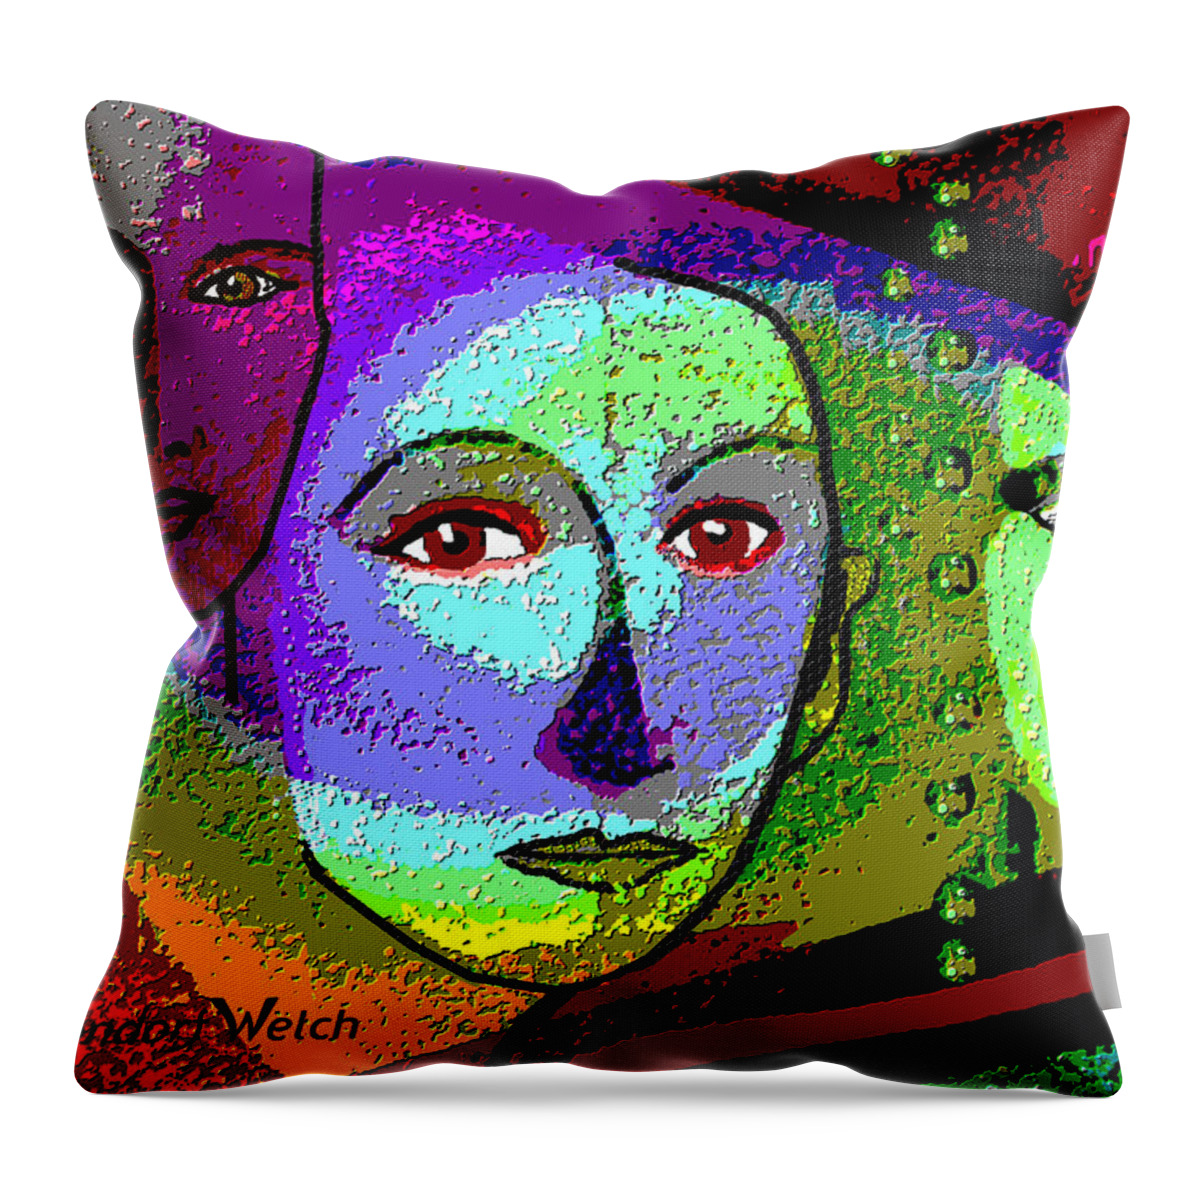 905 Throw Pillow featuring the painting 905 - A Certain glare in the eyes - 2017 by Irmgard Schoendorf Welch